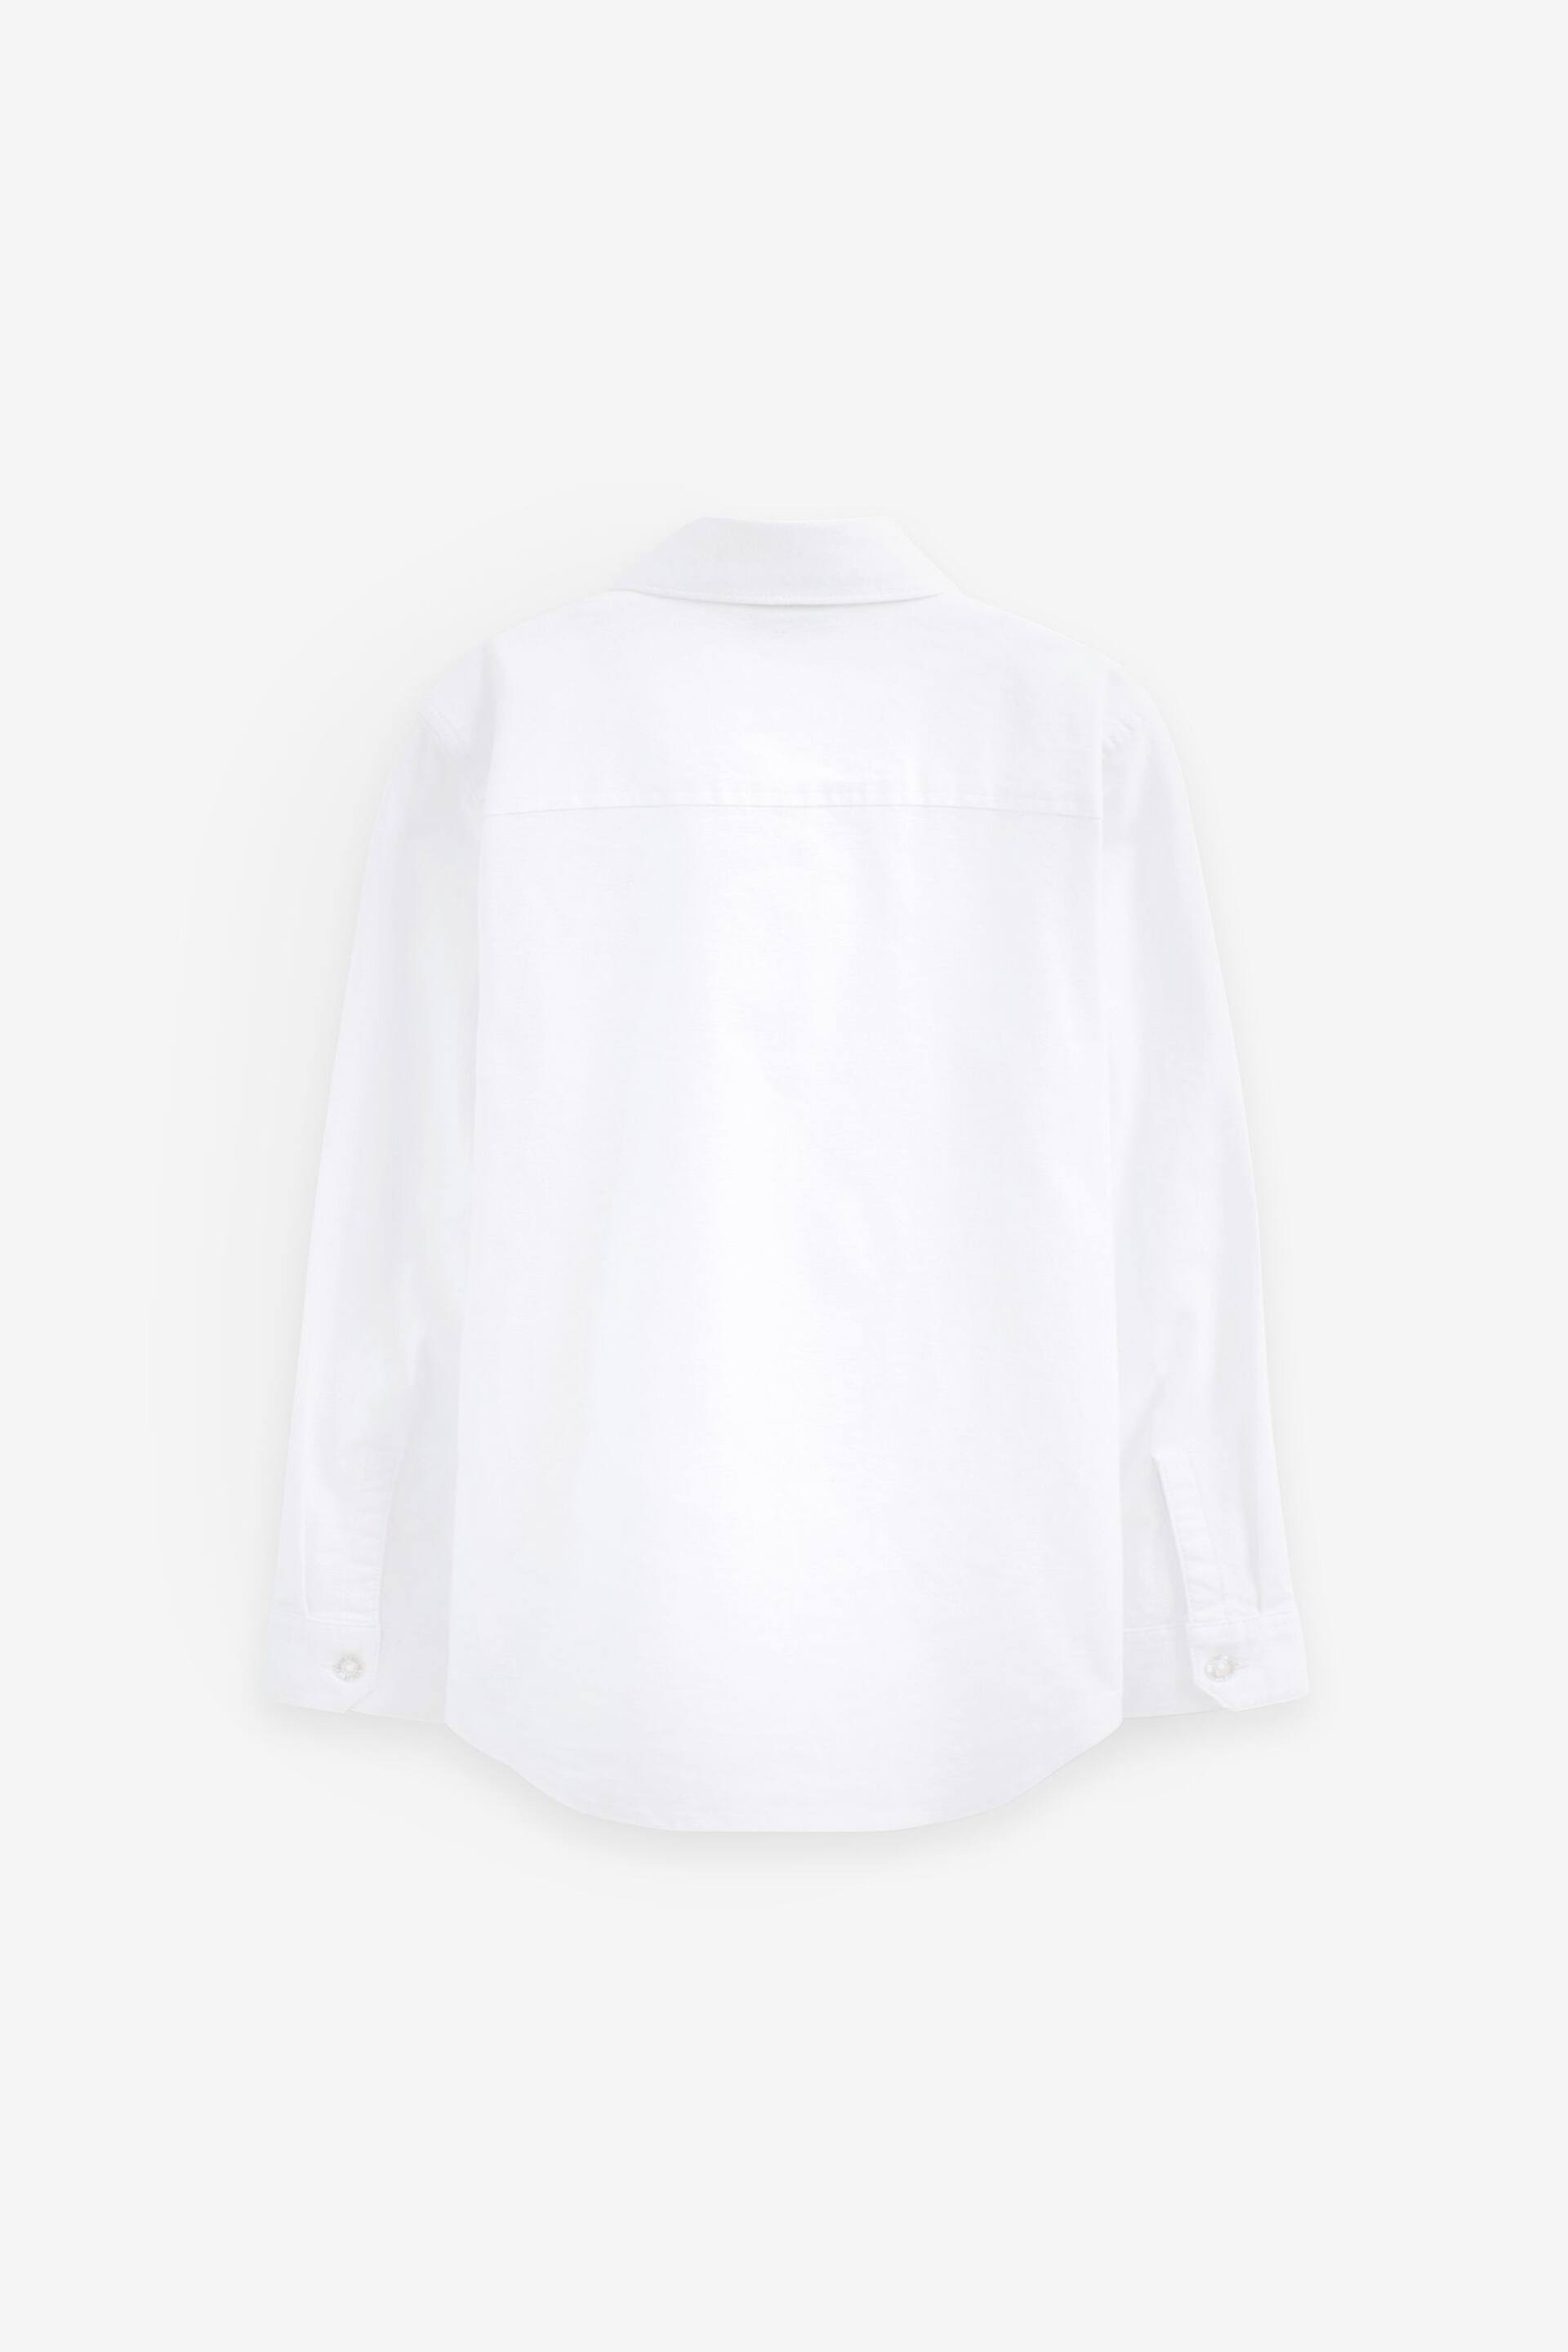 Baker by Ted Baker Oxford Shirt - Image 6 of 7